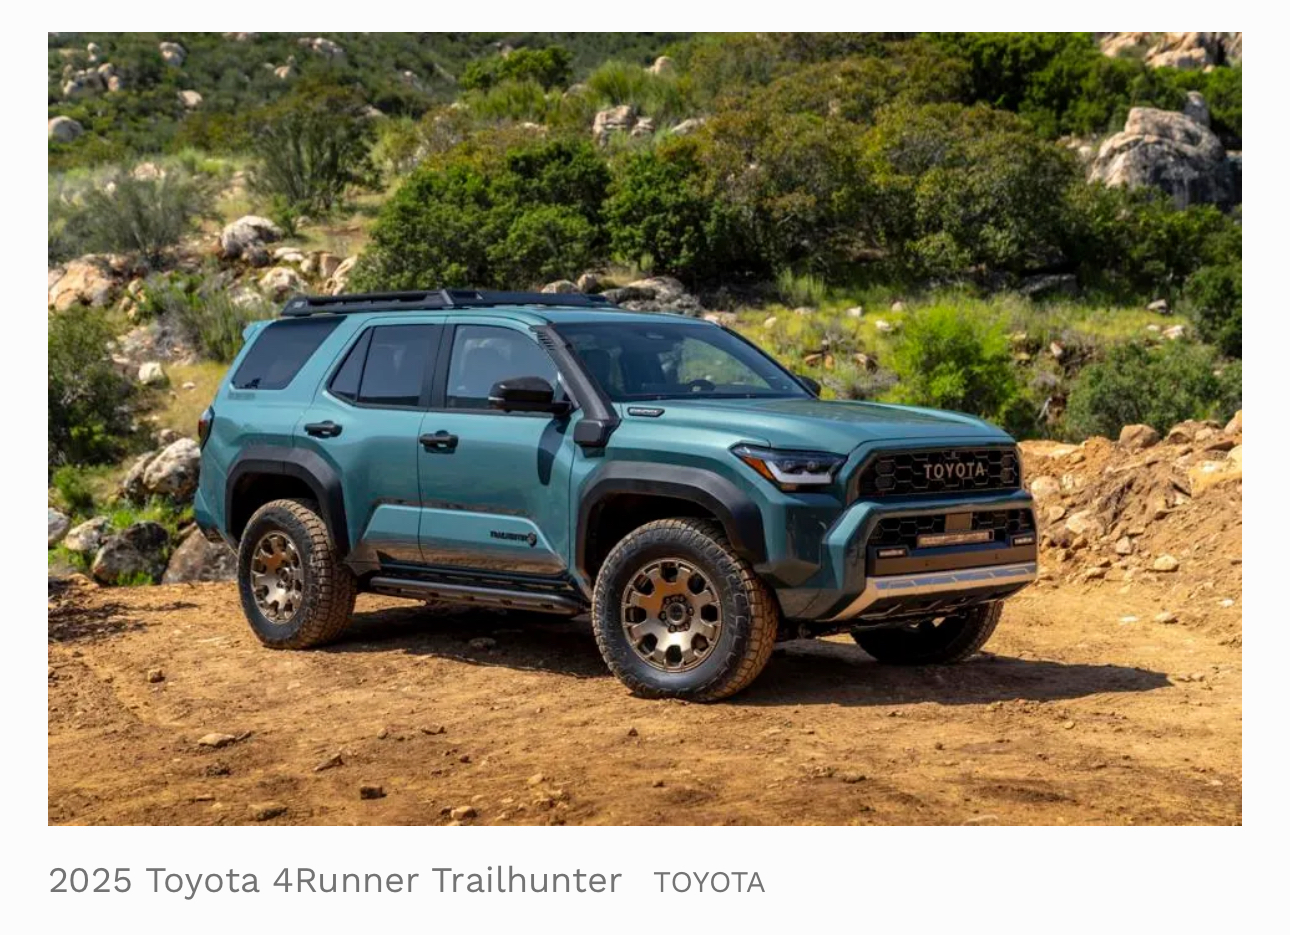 Everything You Need to Know About The 2025 Toyota 4Runner